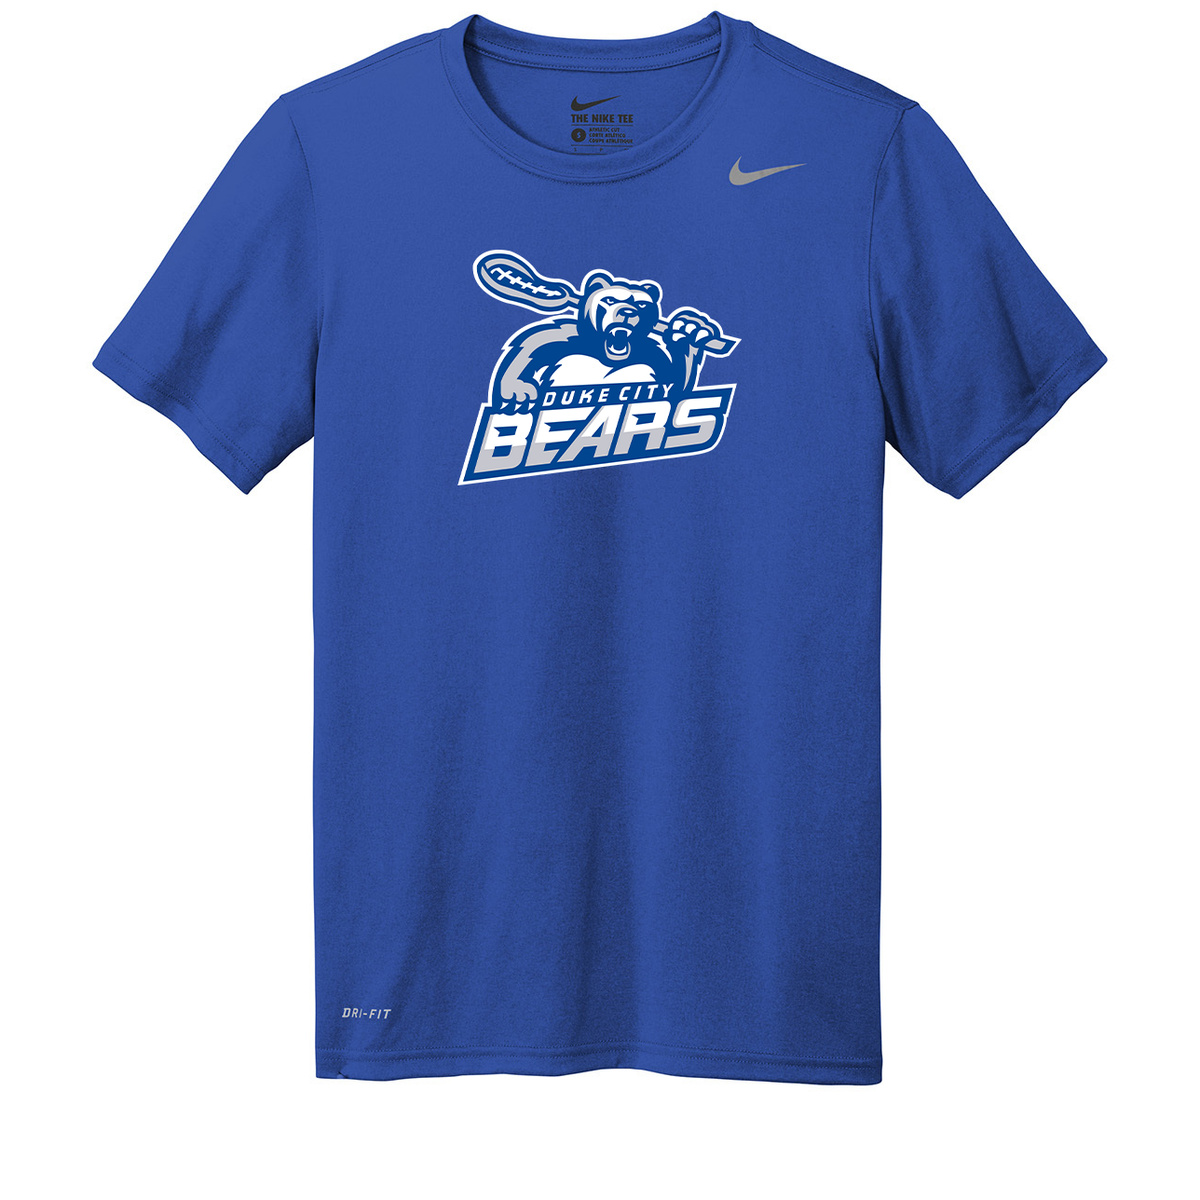 REQUIRED SHOOTING SHIRT (boys only) Duke City Bears Lacrosse Nike Legend Tee